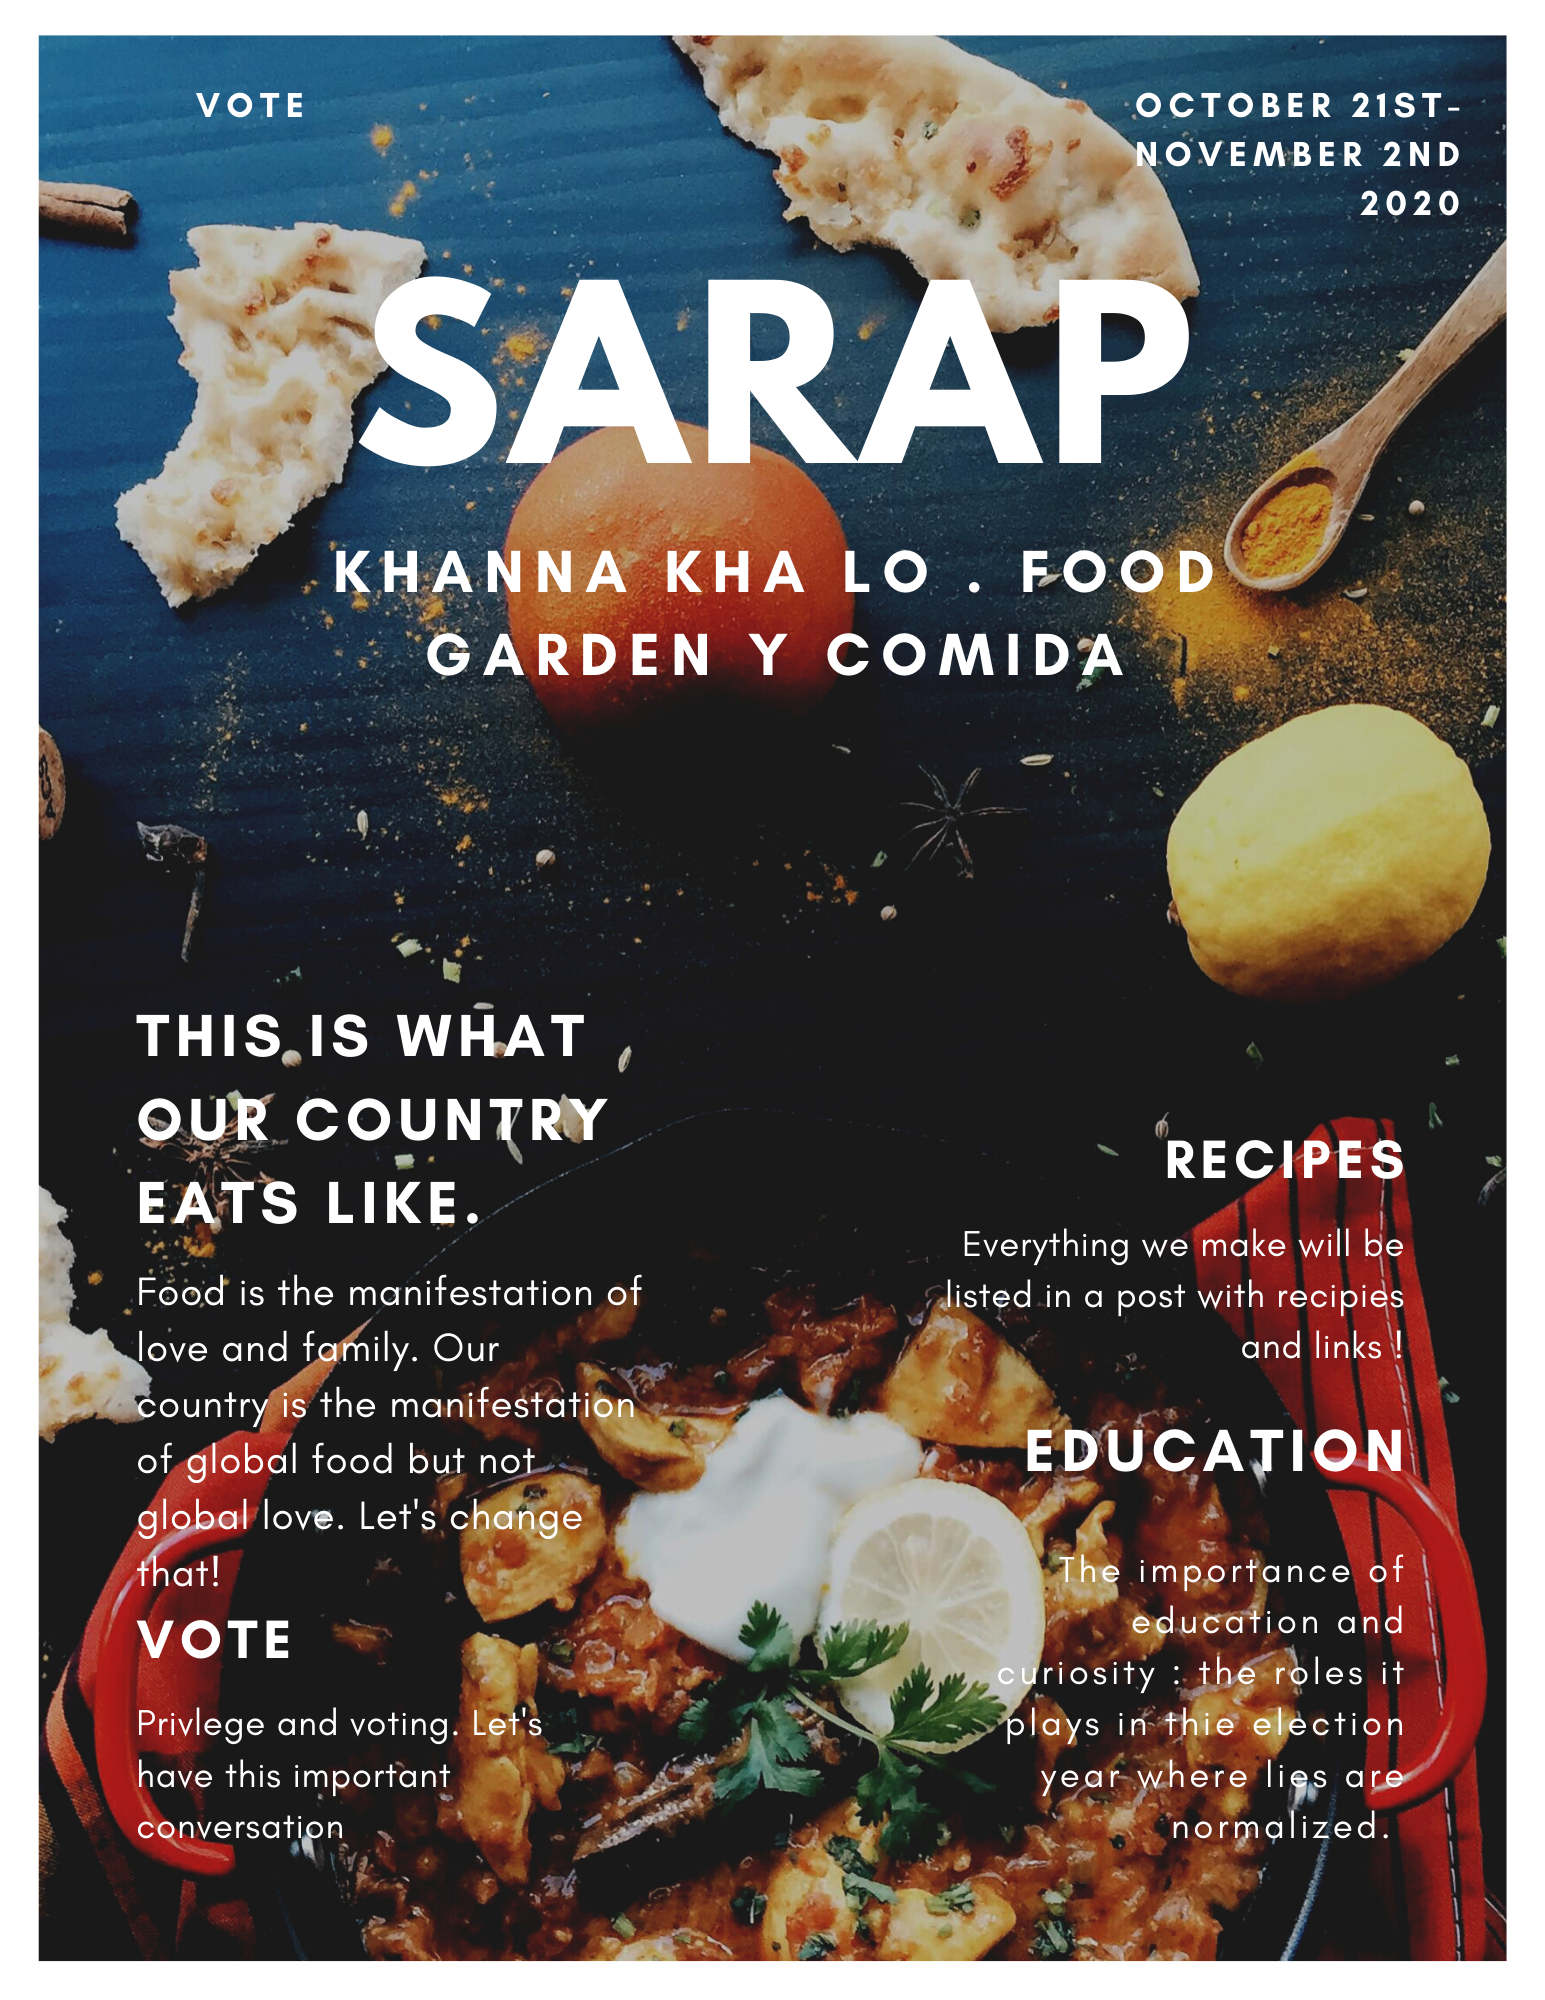 SARAP Khanna Kha Lo-This is What Our Country Eats Like